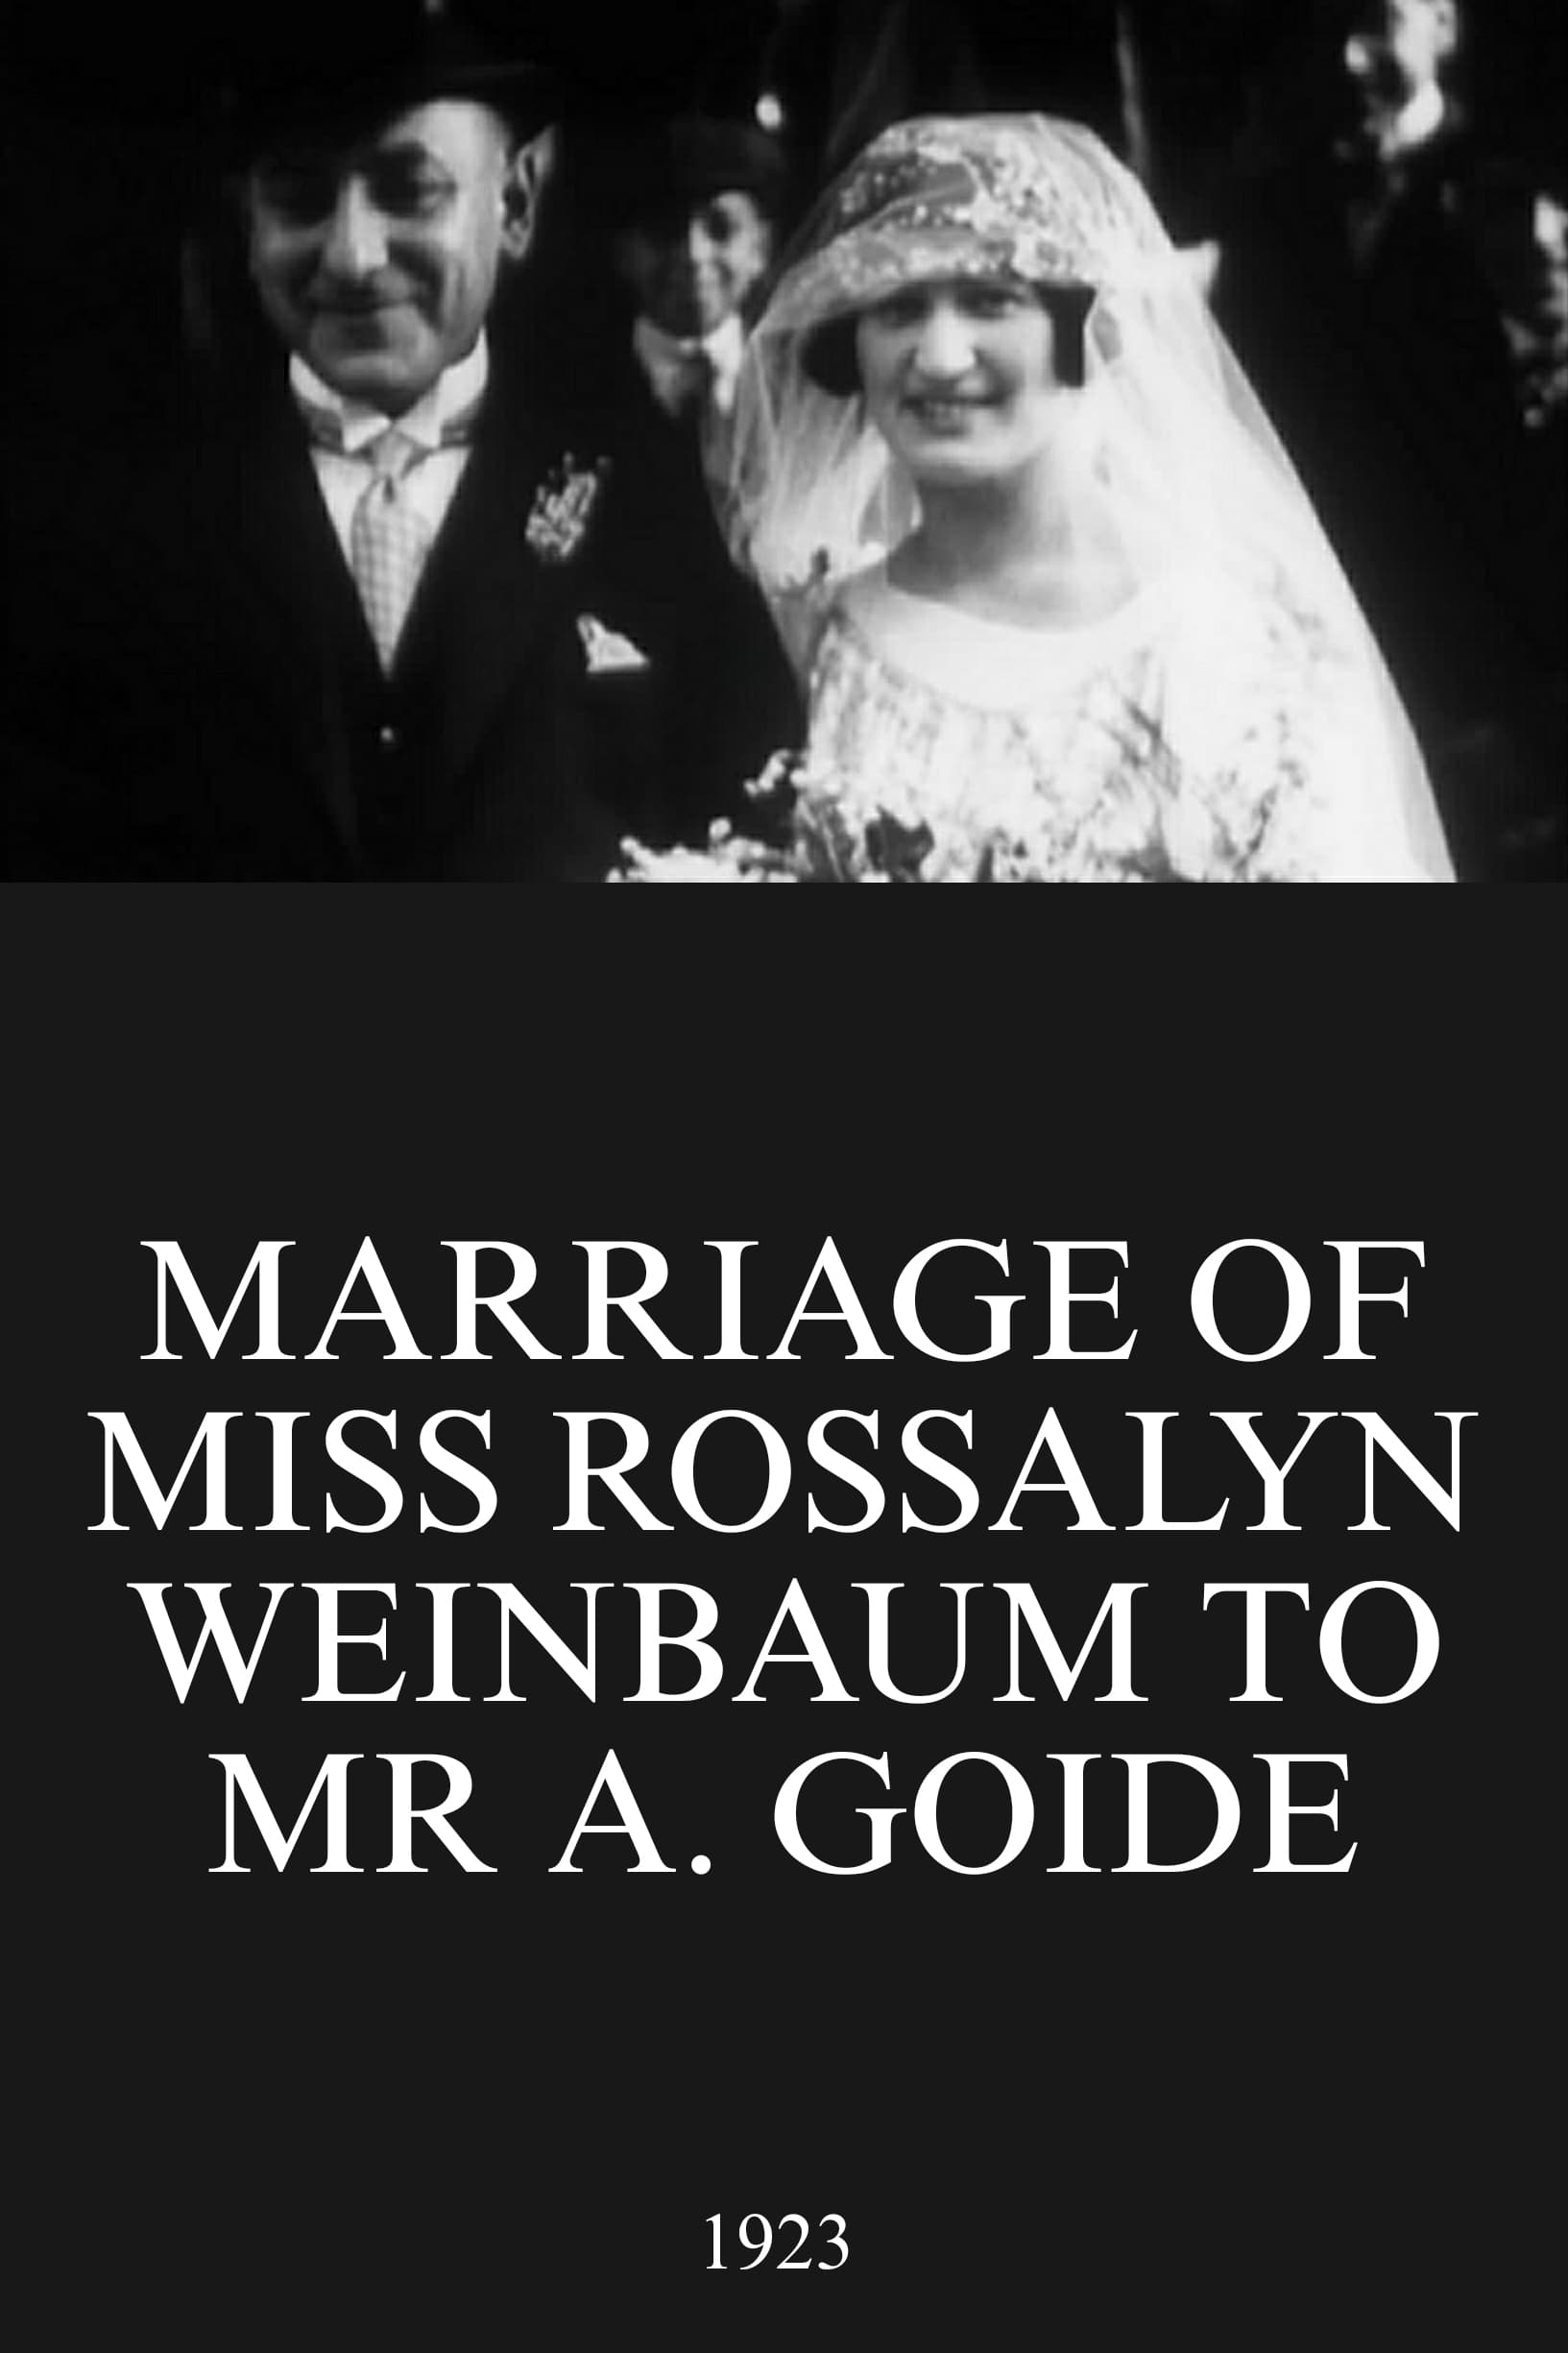 Marriage of Miss Rossalyn Weinbaum to Mr A. Goide